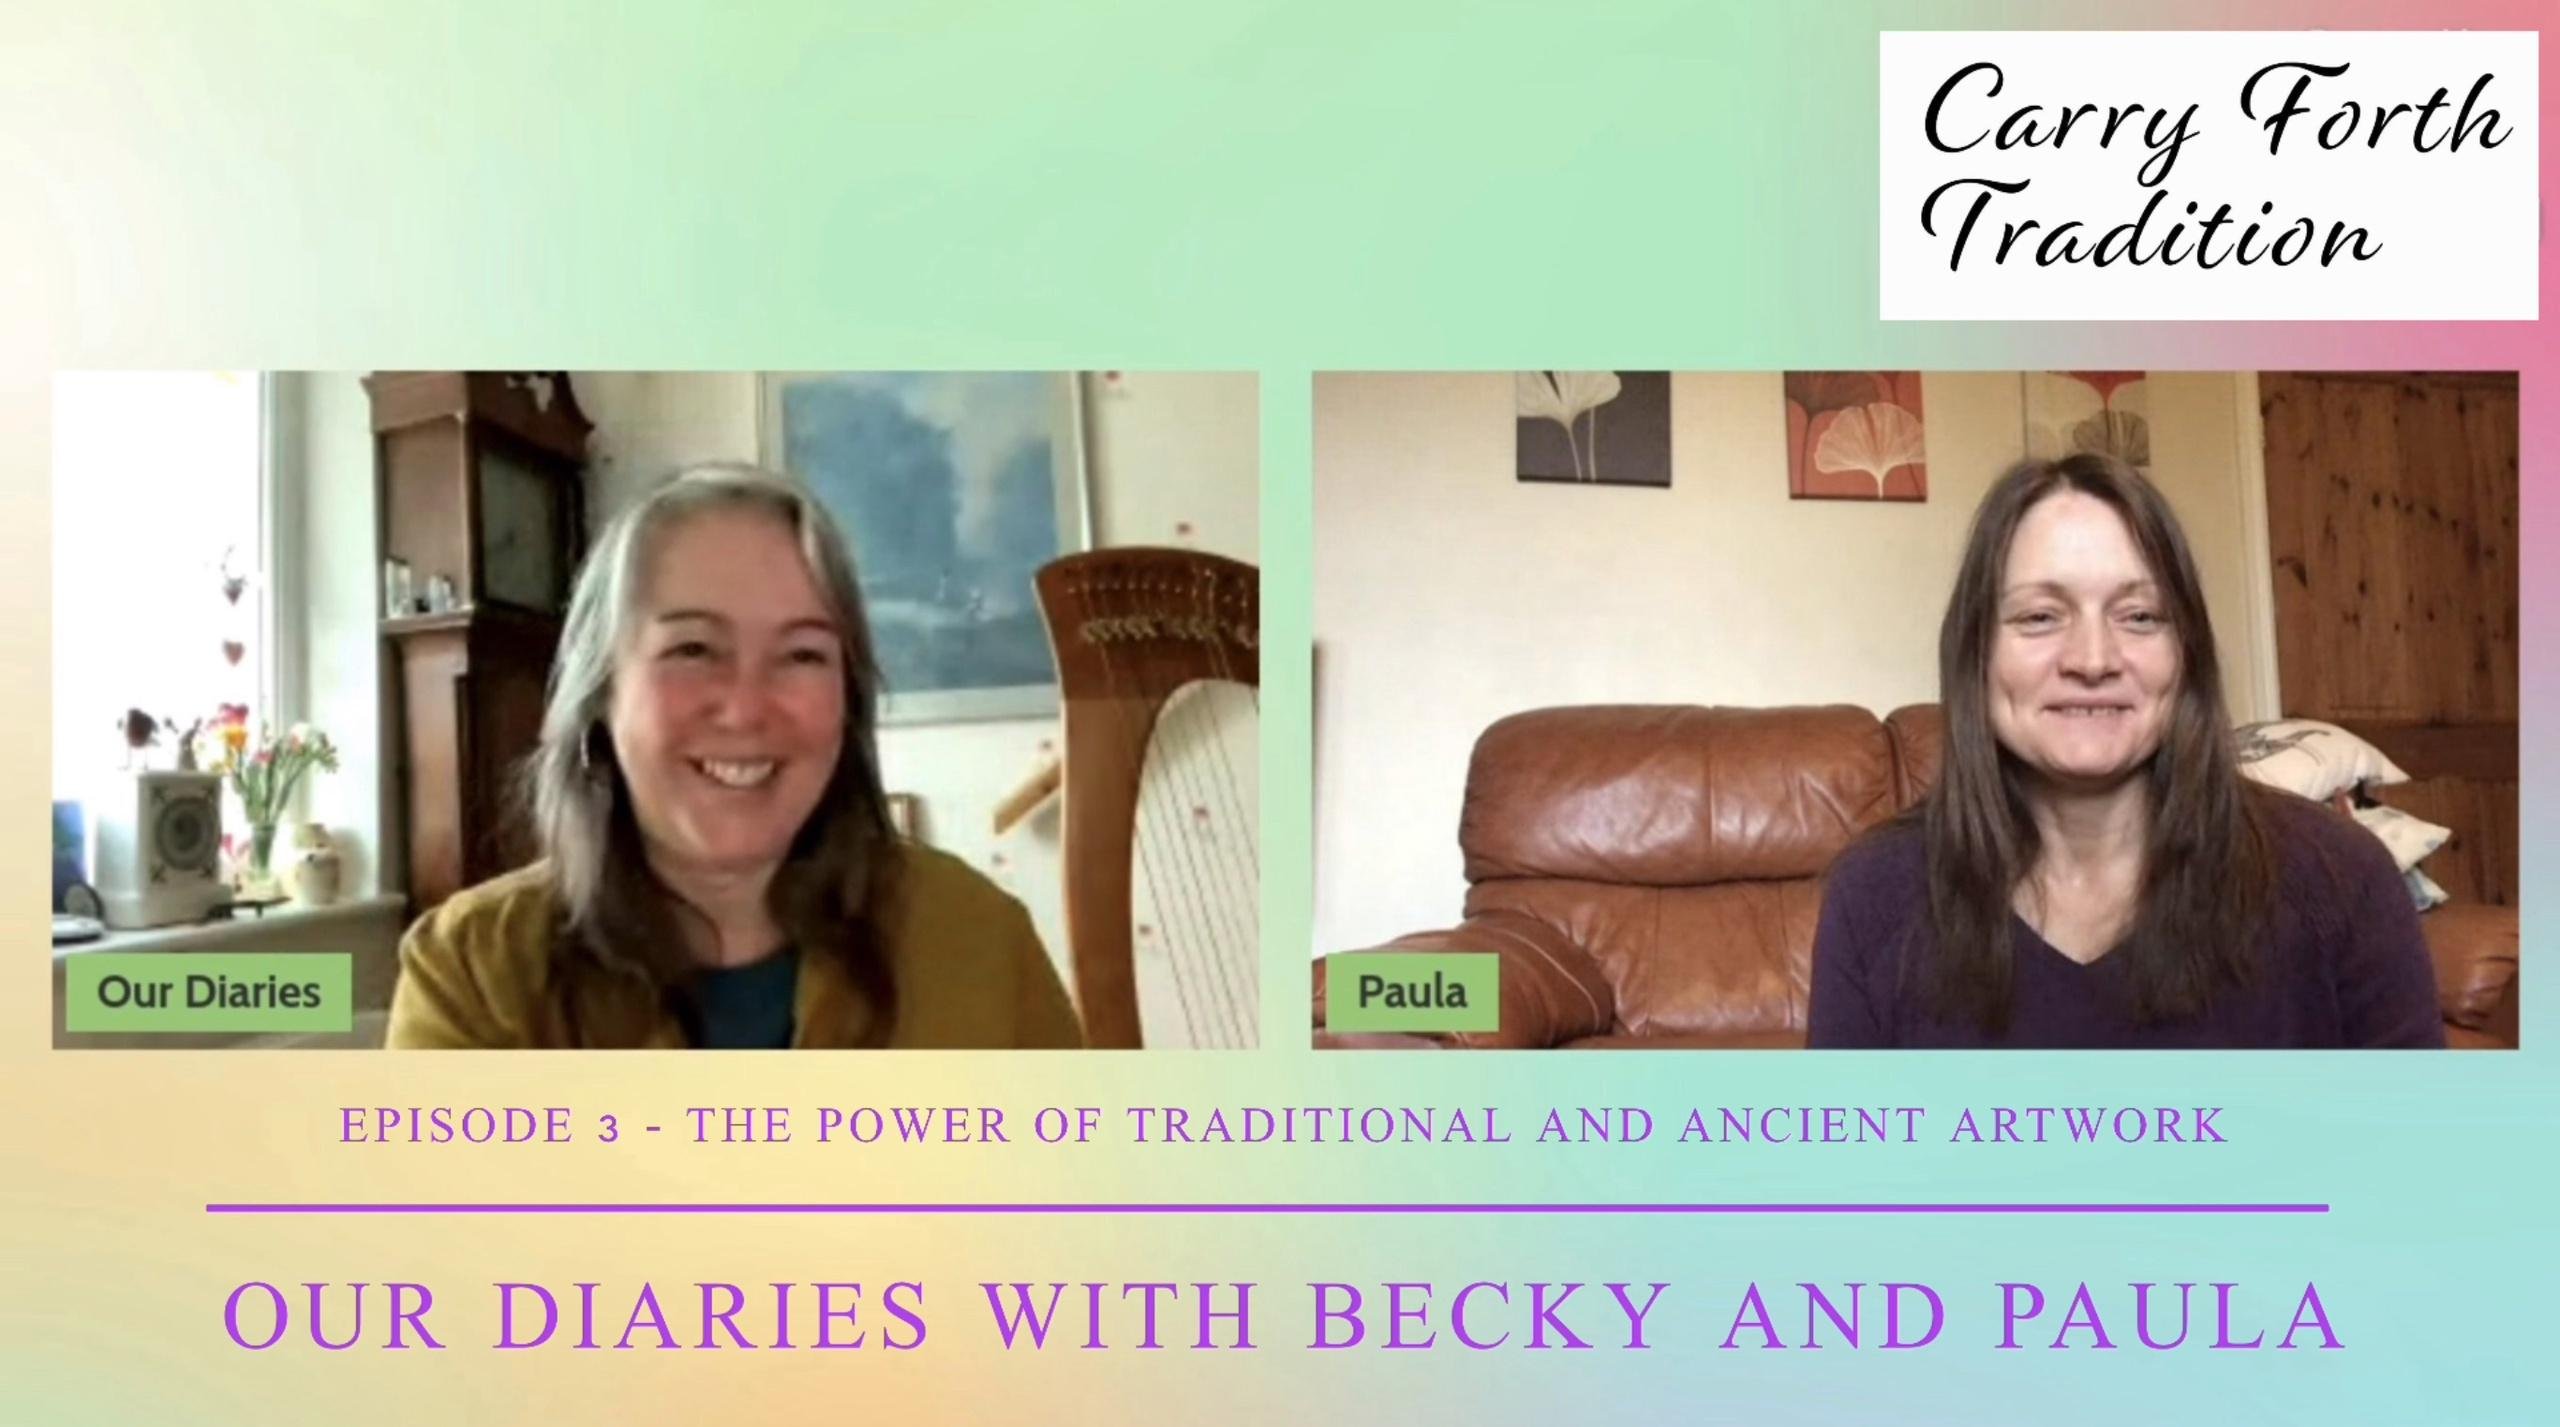 Our Diaries with Becky and Paula - Episode 3 - The Power of Traditional and Ancient Artwork